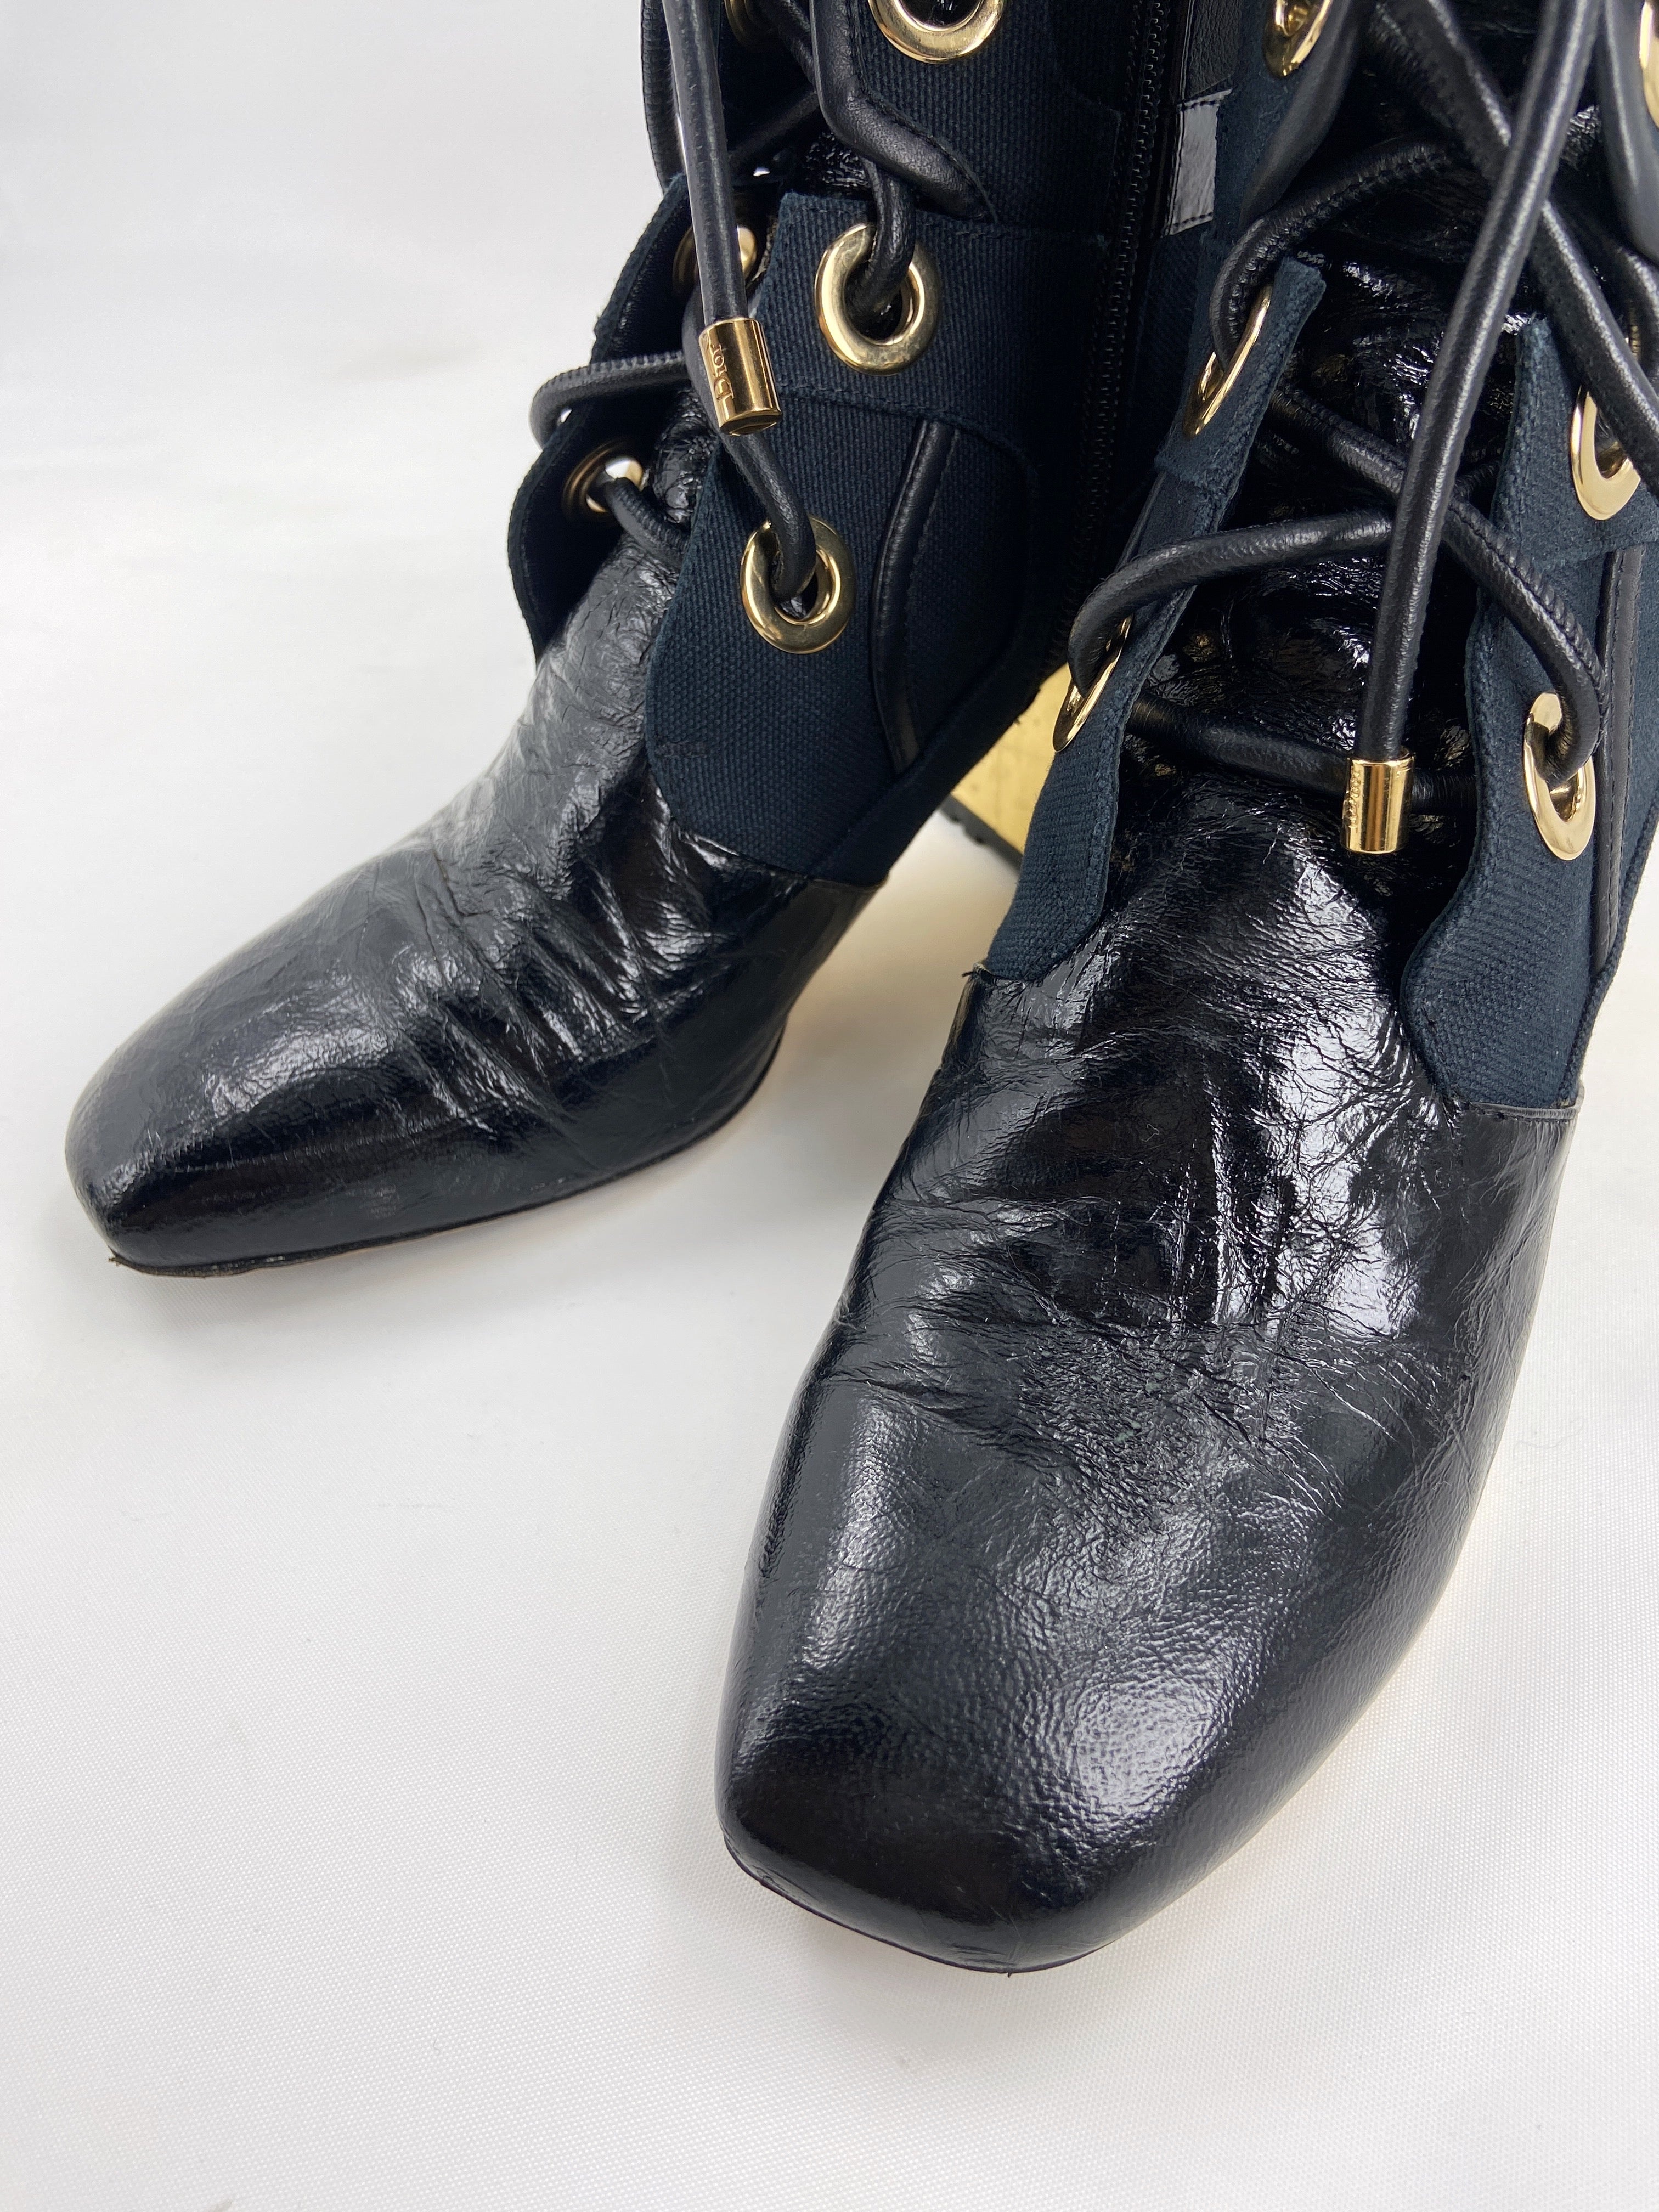 Christian Dior 2017 Glorious Belted Lambskin Leather Boots 37 - 9